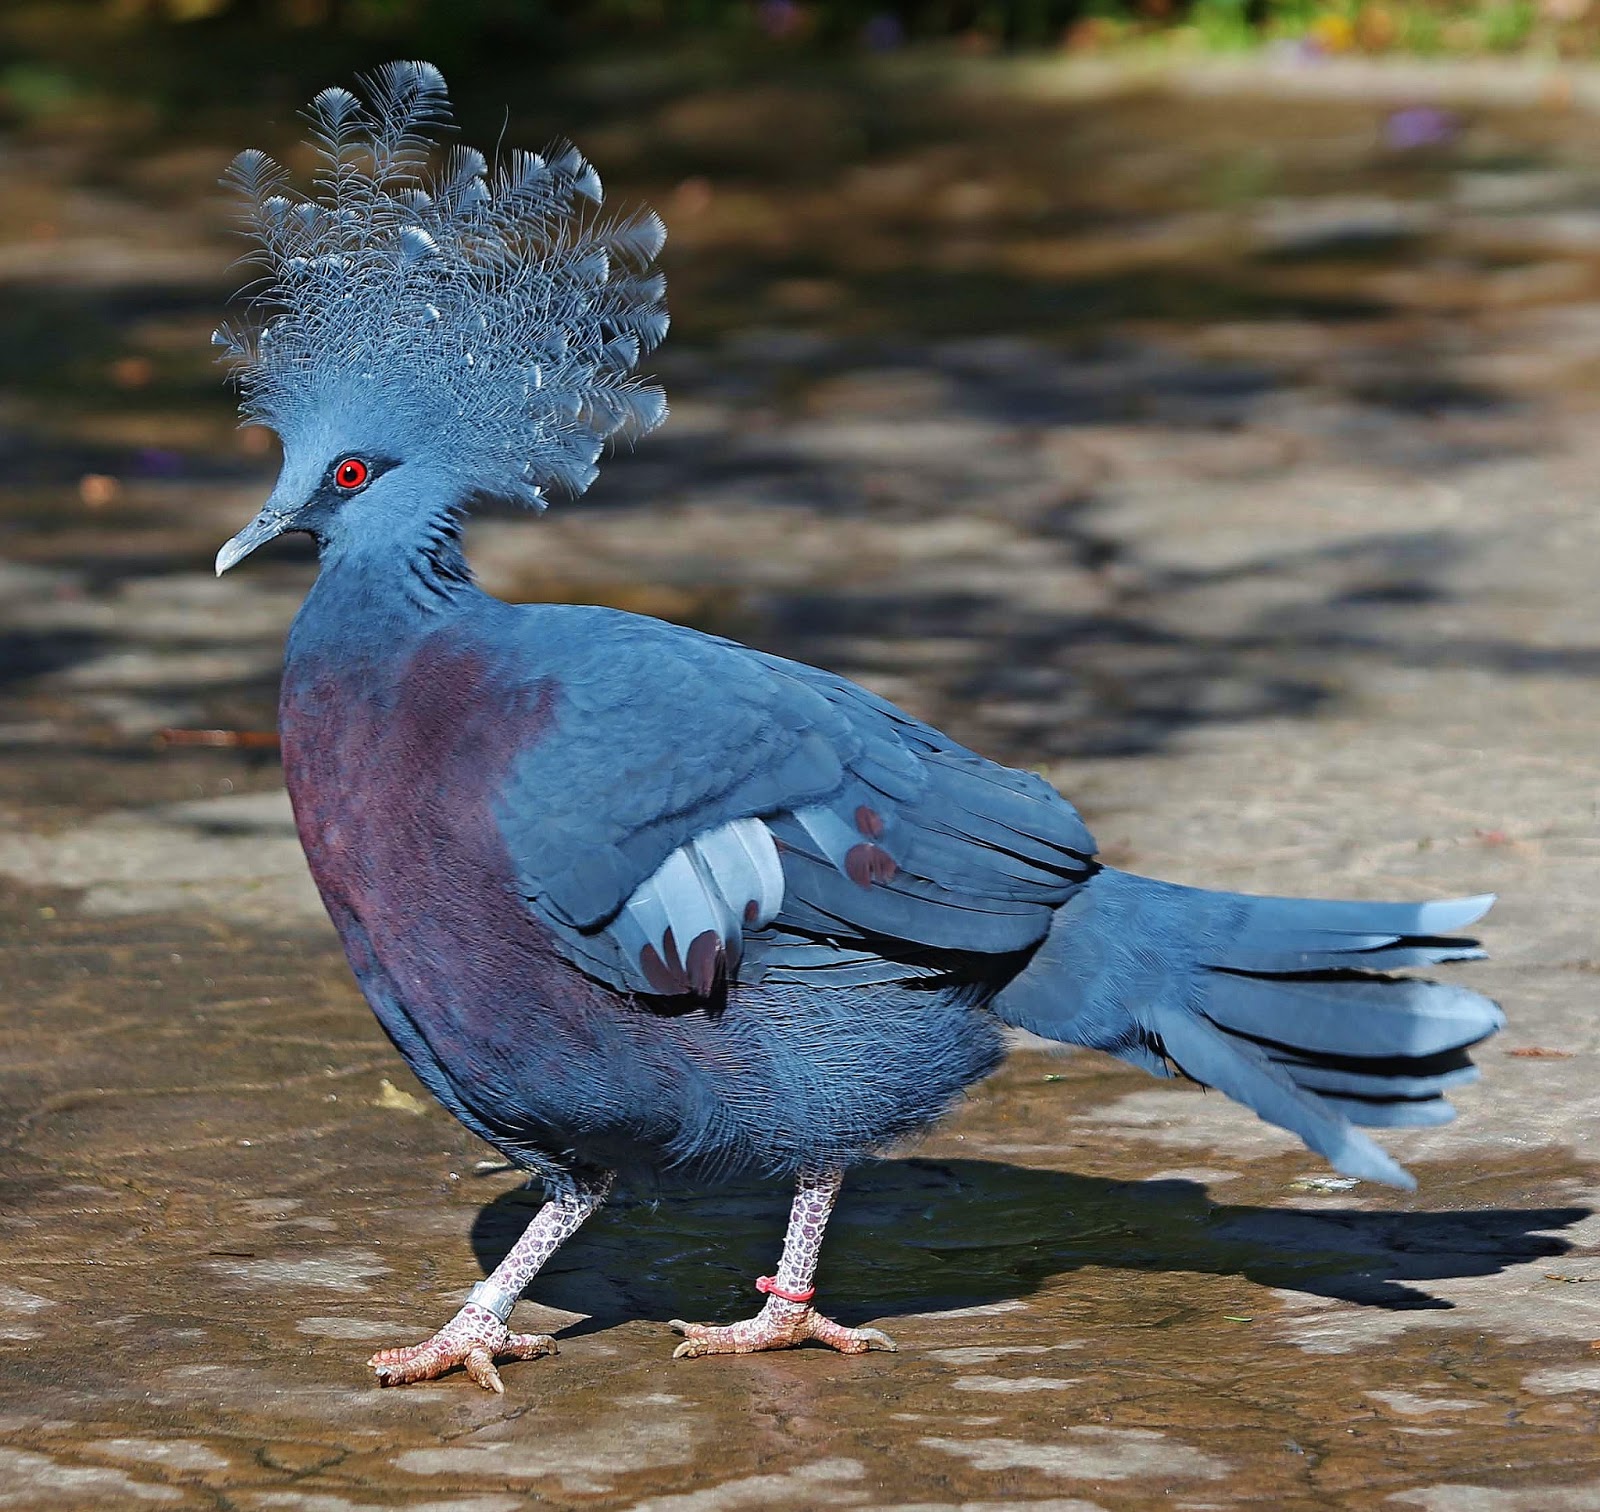 Birds of the World: Victoria crowned pigeon